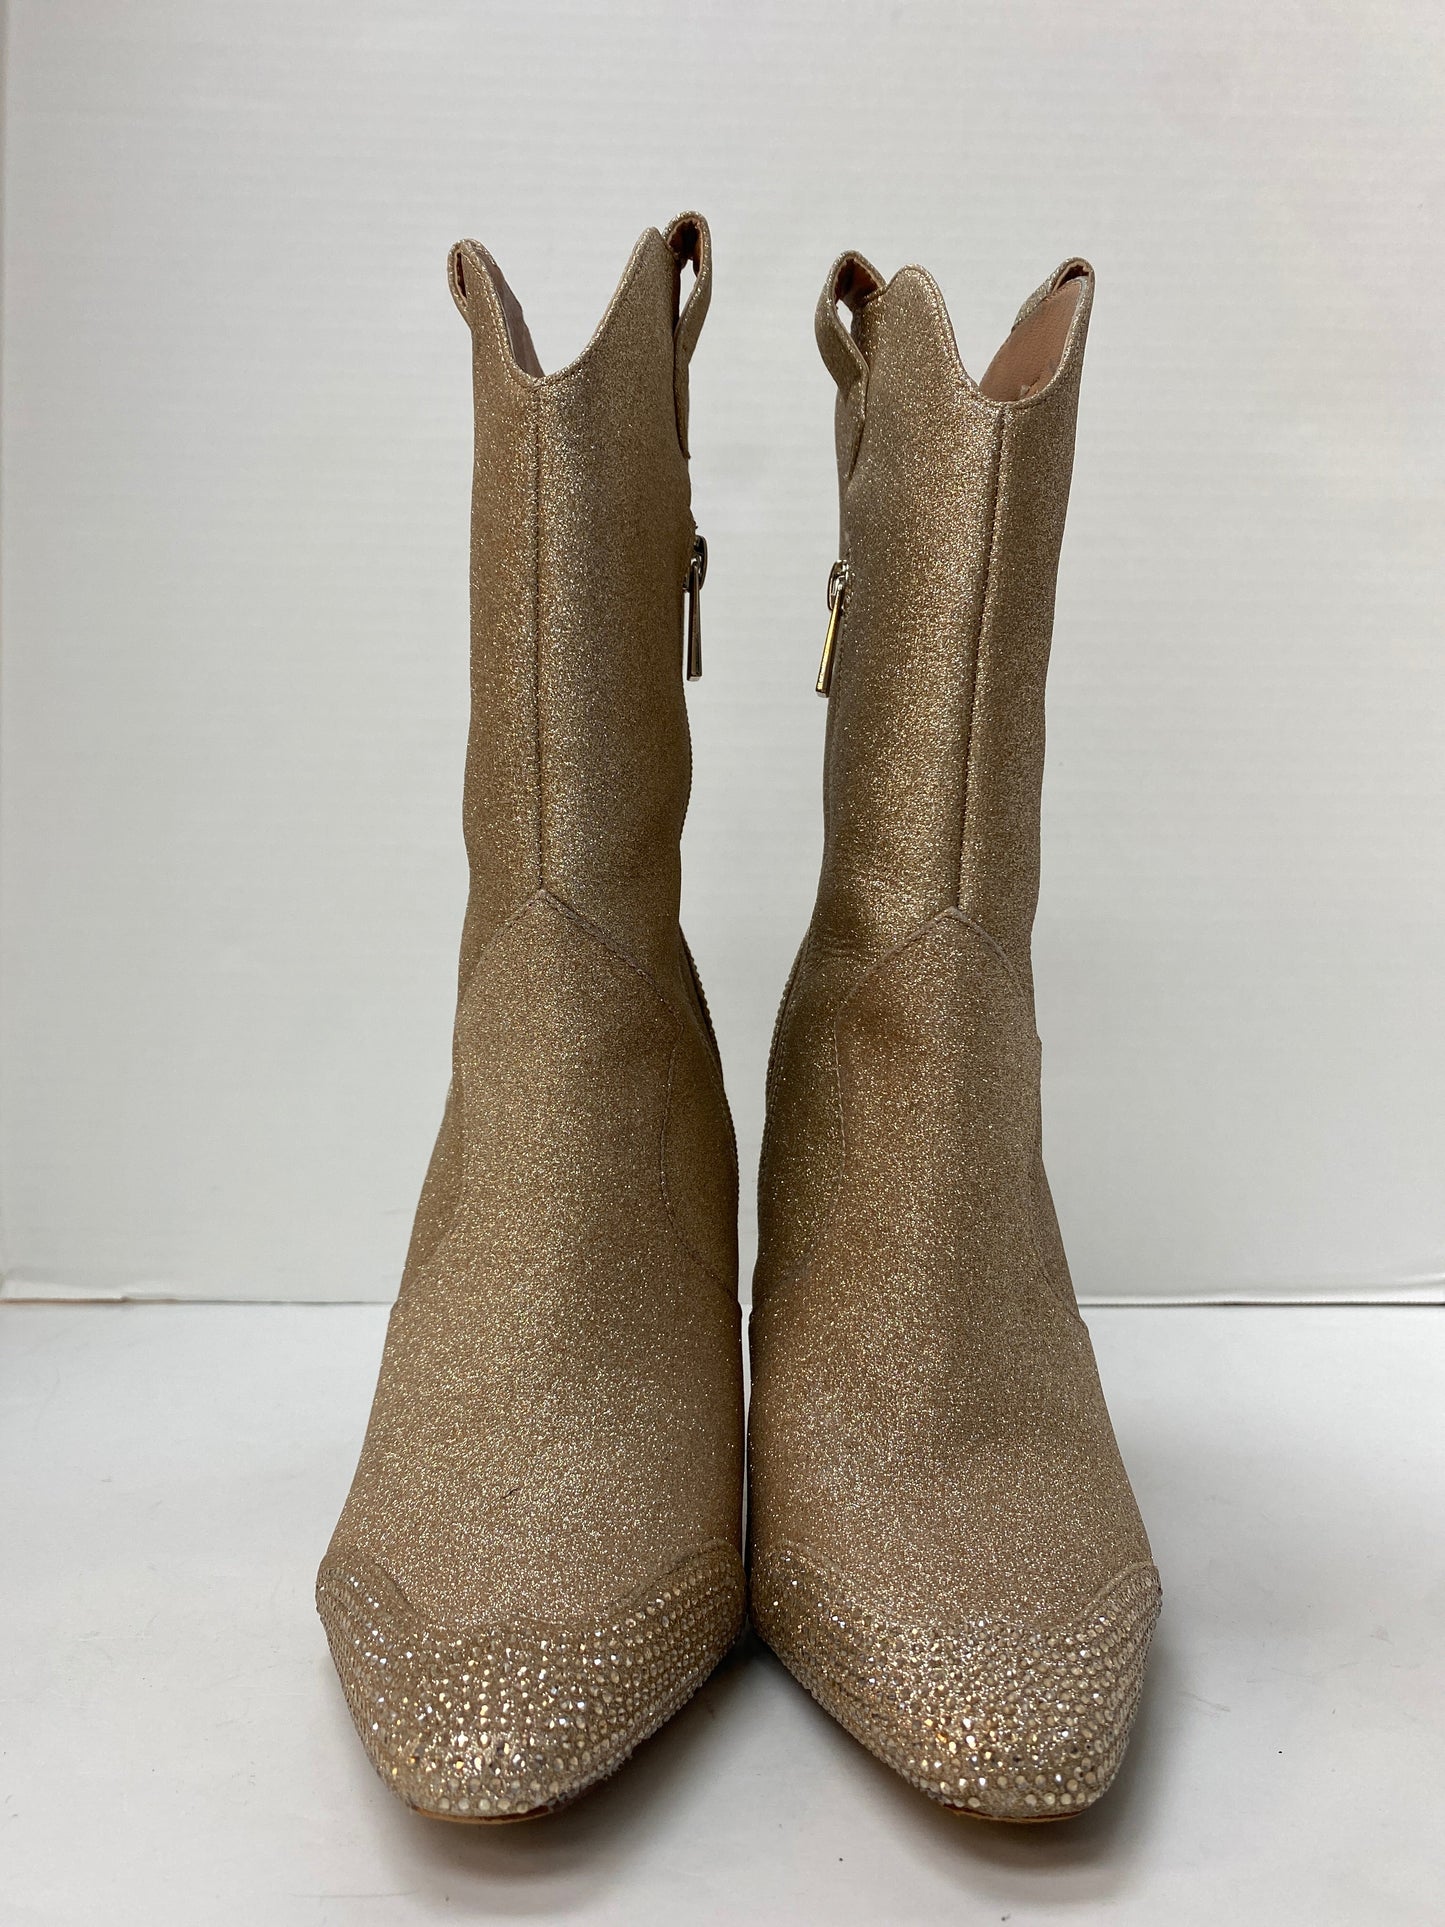 Boots Ankle Heels By Jessica Simpson  Size: 6.5